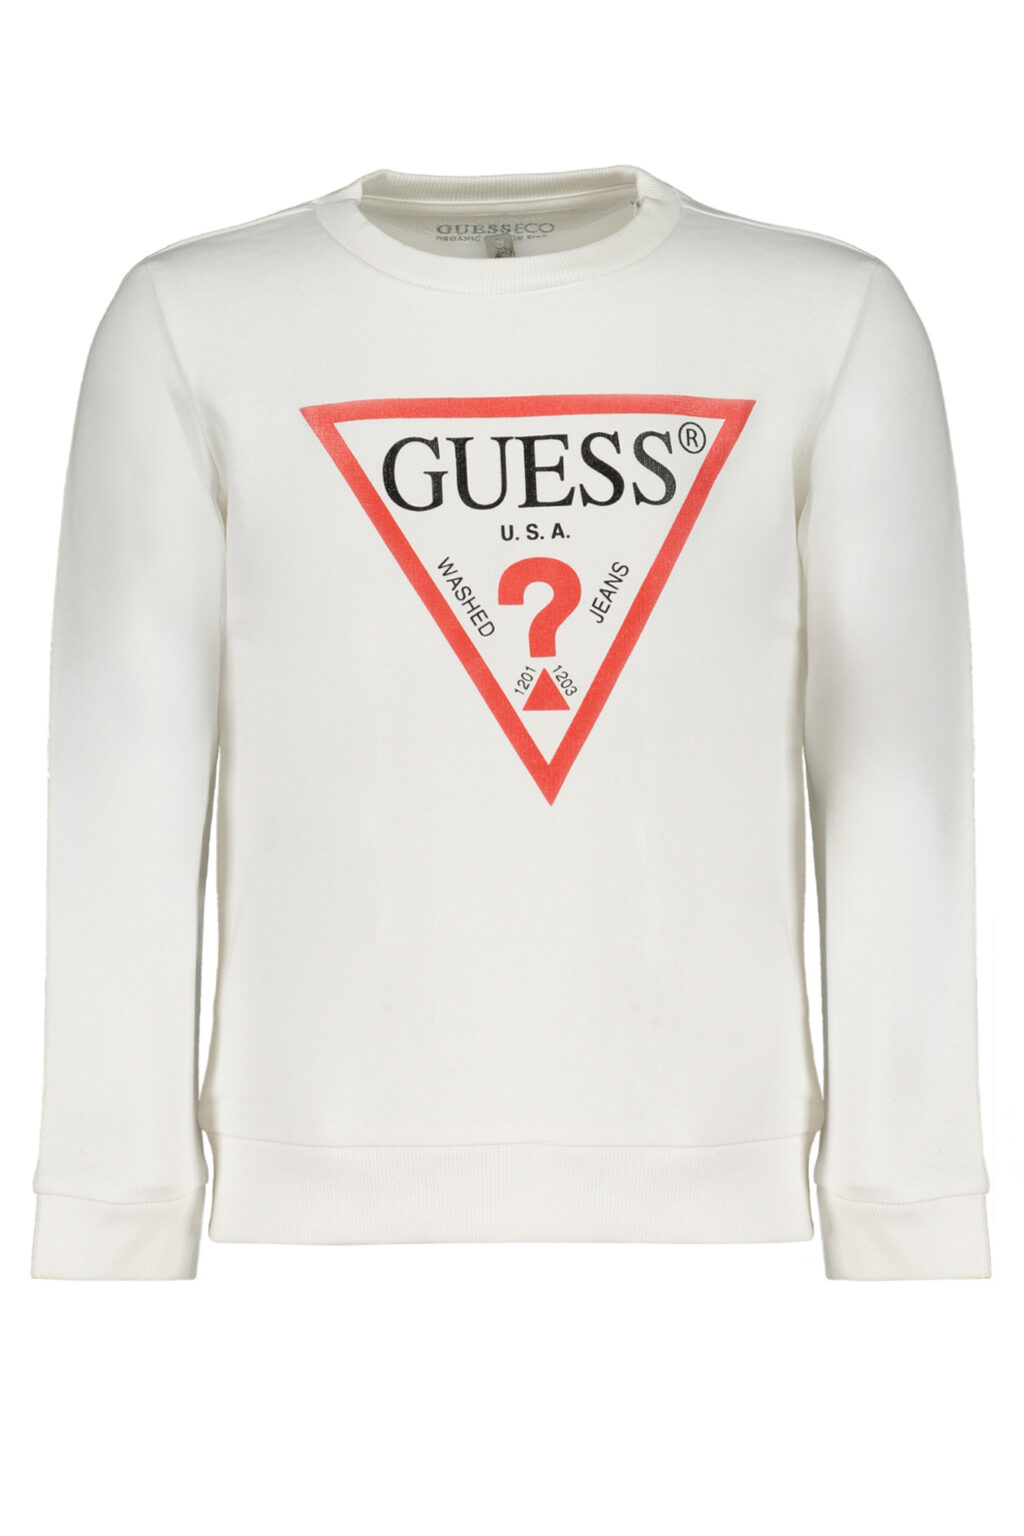 GUESS JEANS SWEATSHIRT WITHOUT ZIP FOR CHILDREN WHITE N73Q10KAUG0_BITWHT